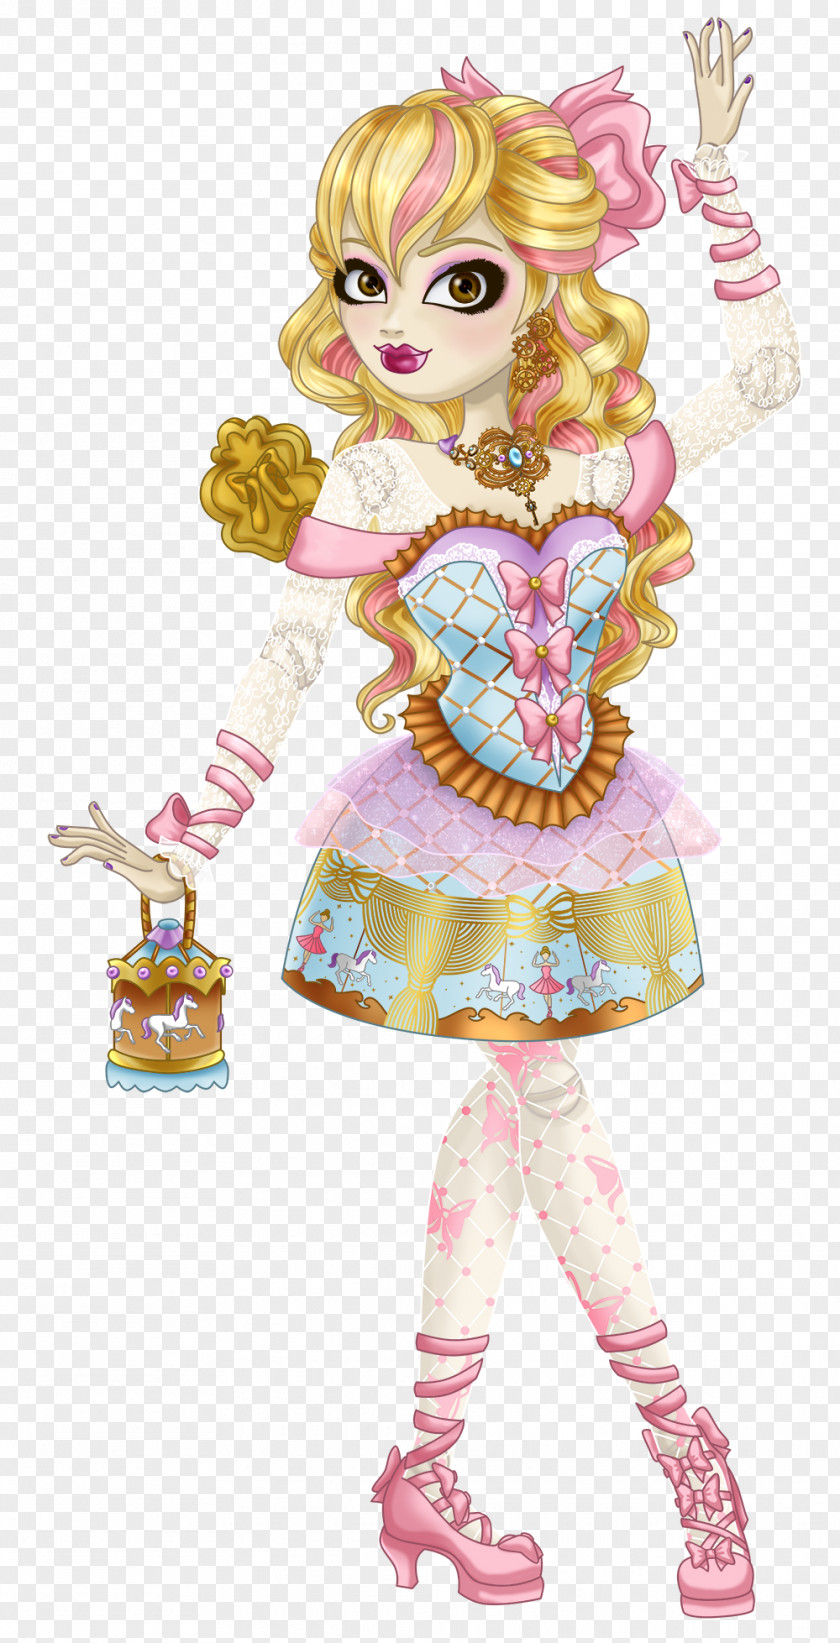 Daughter Barbie Toy Doll Art Figurine PNG